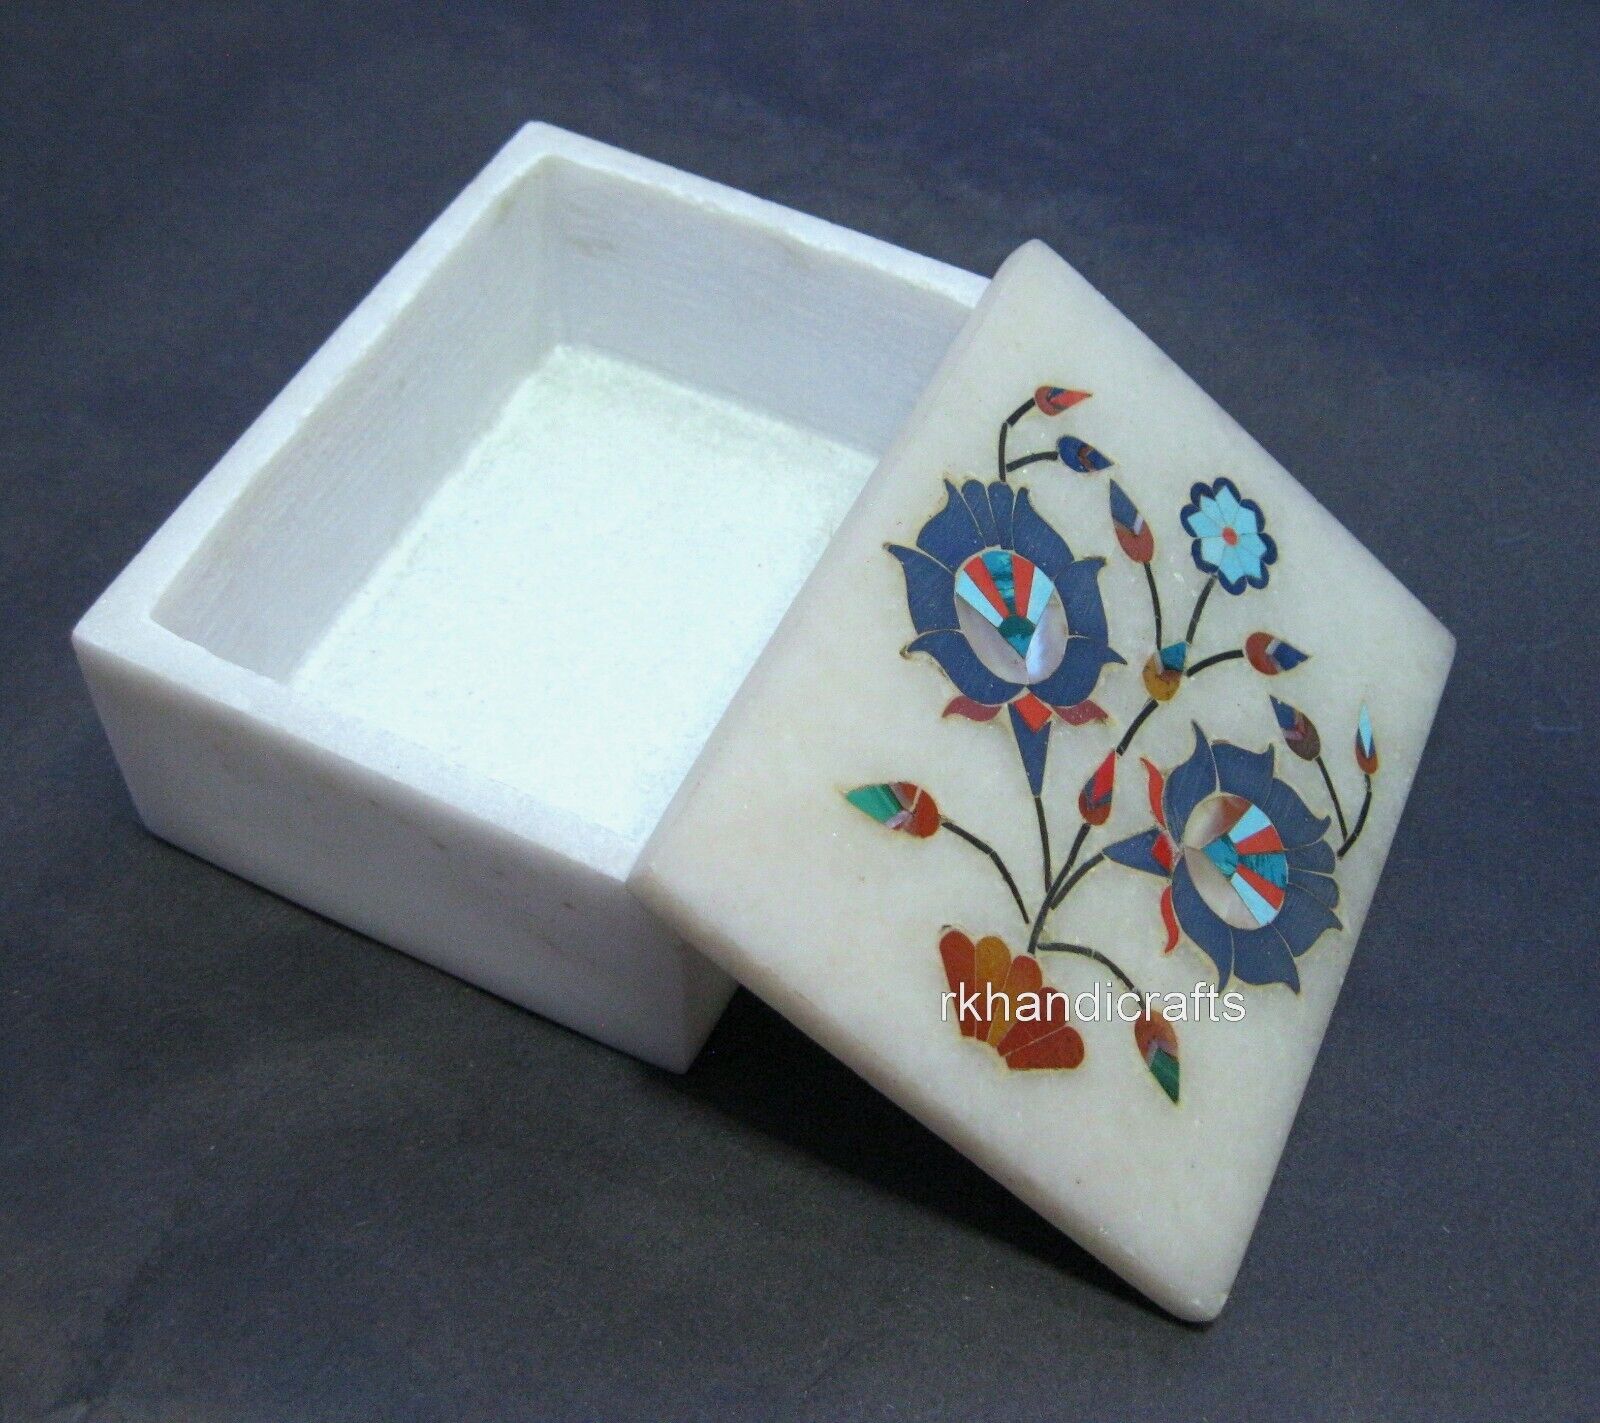 4 x 3 Inches Antique Pattern Inlay Work Trinket Box White Marble Stationary Box